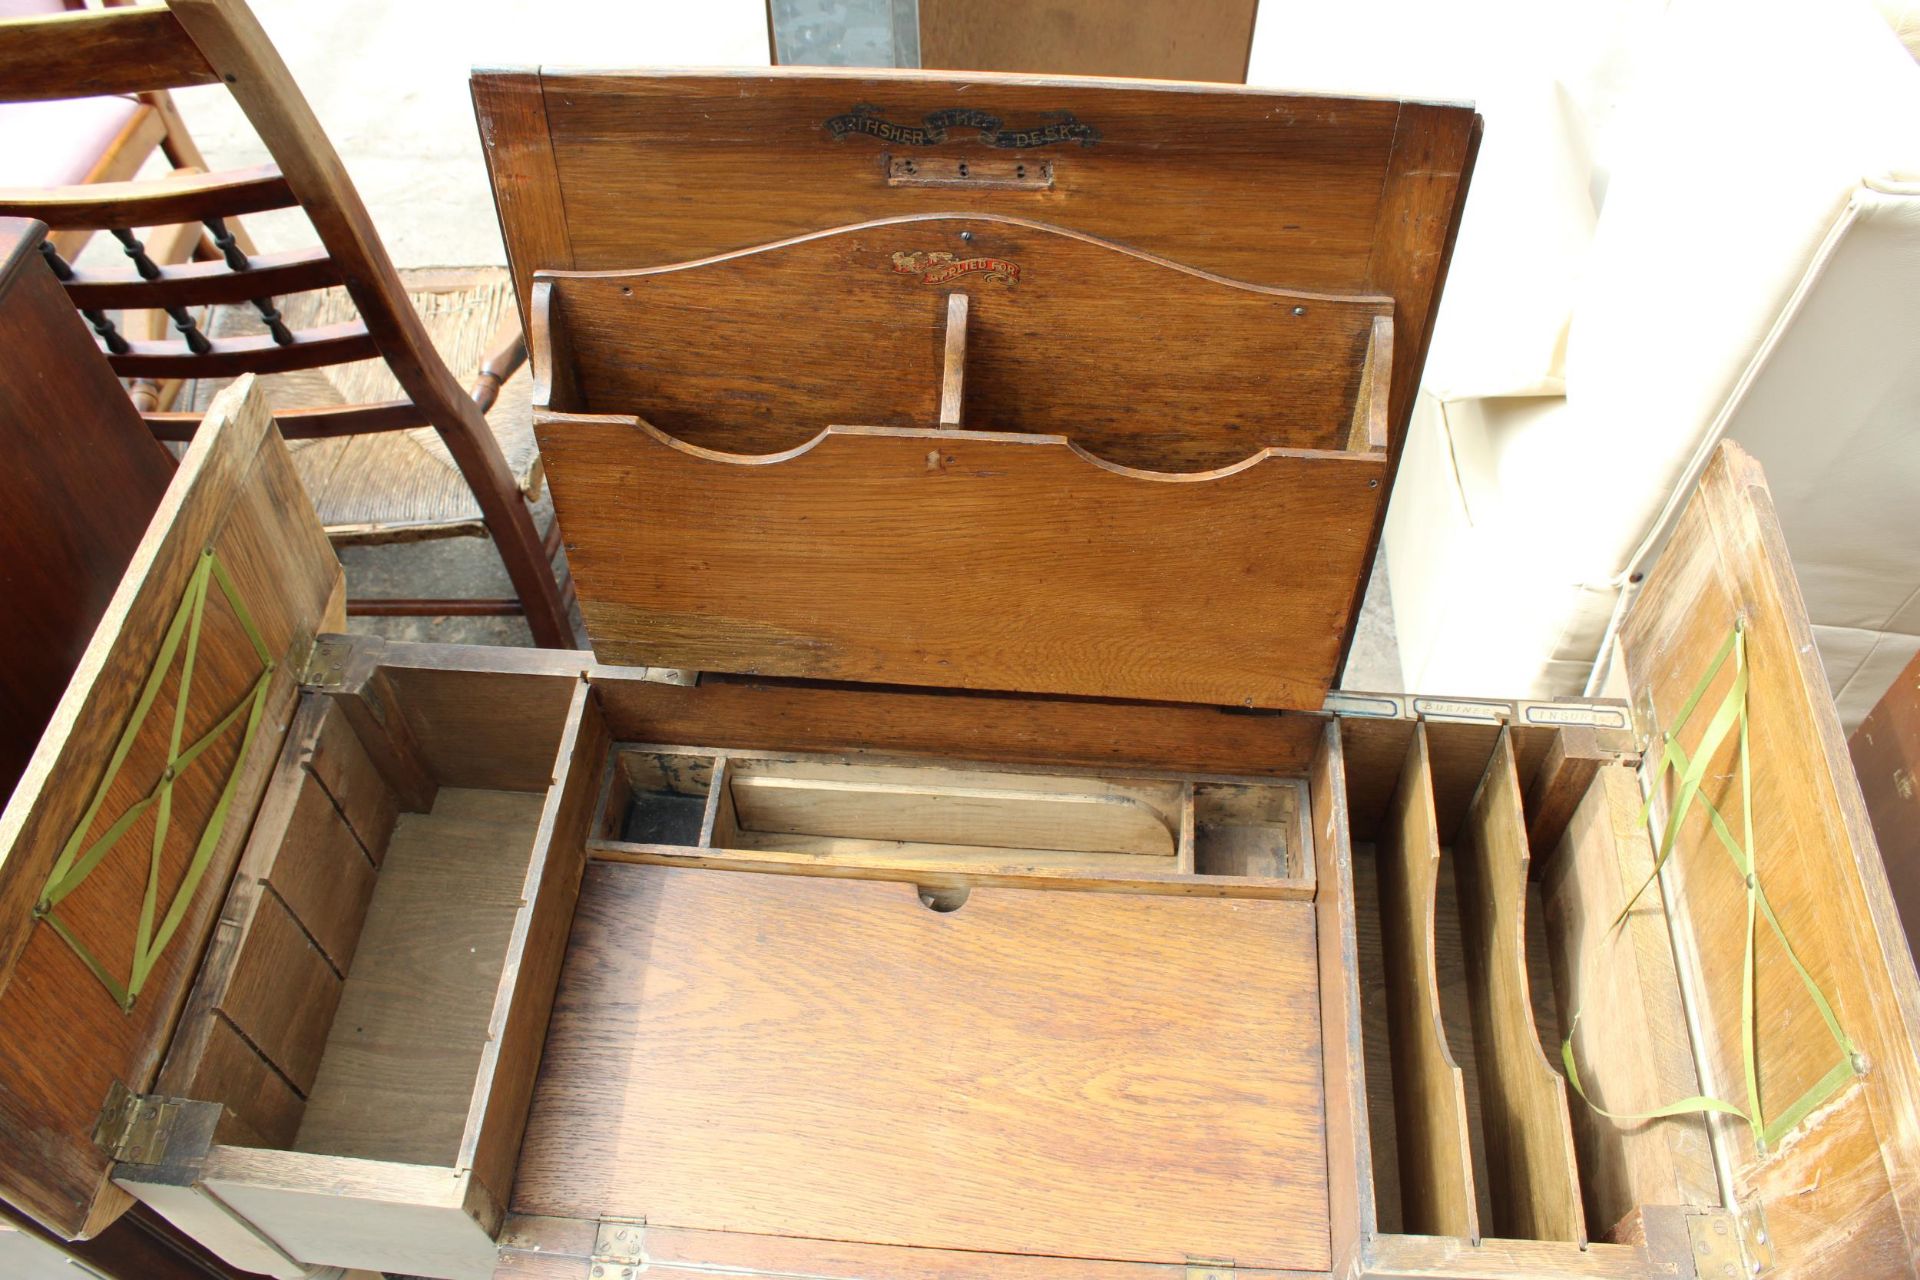 AN EARLY 20TH CENTURY OAK 'THE BRITISHER DESK' WITH FOLD-OUT WRITING AND STORAGE SECTIONS, 36" WIDE - Image 3 of 6